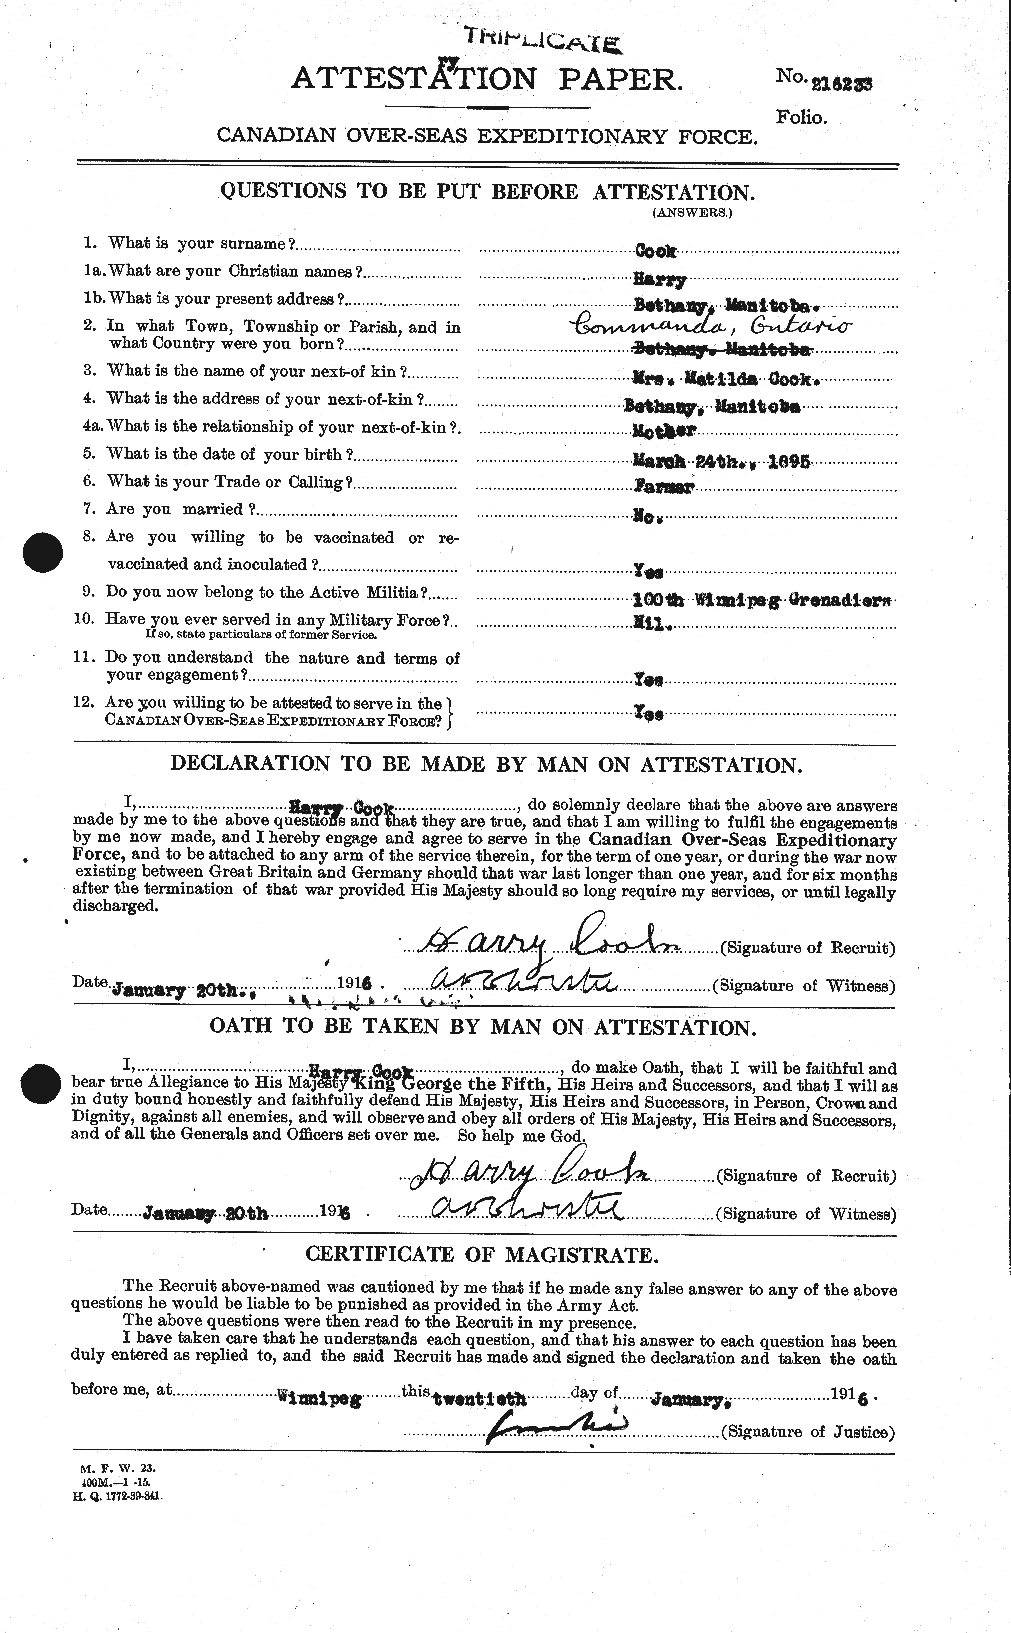 Personnel Records of the First World War - CEF 073761a